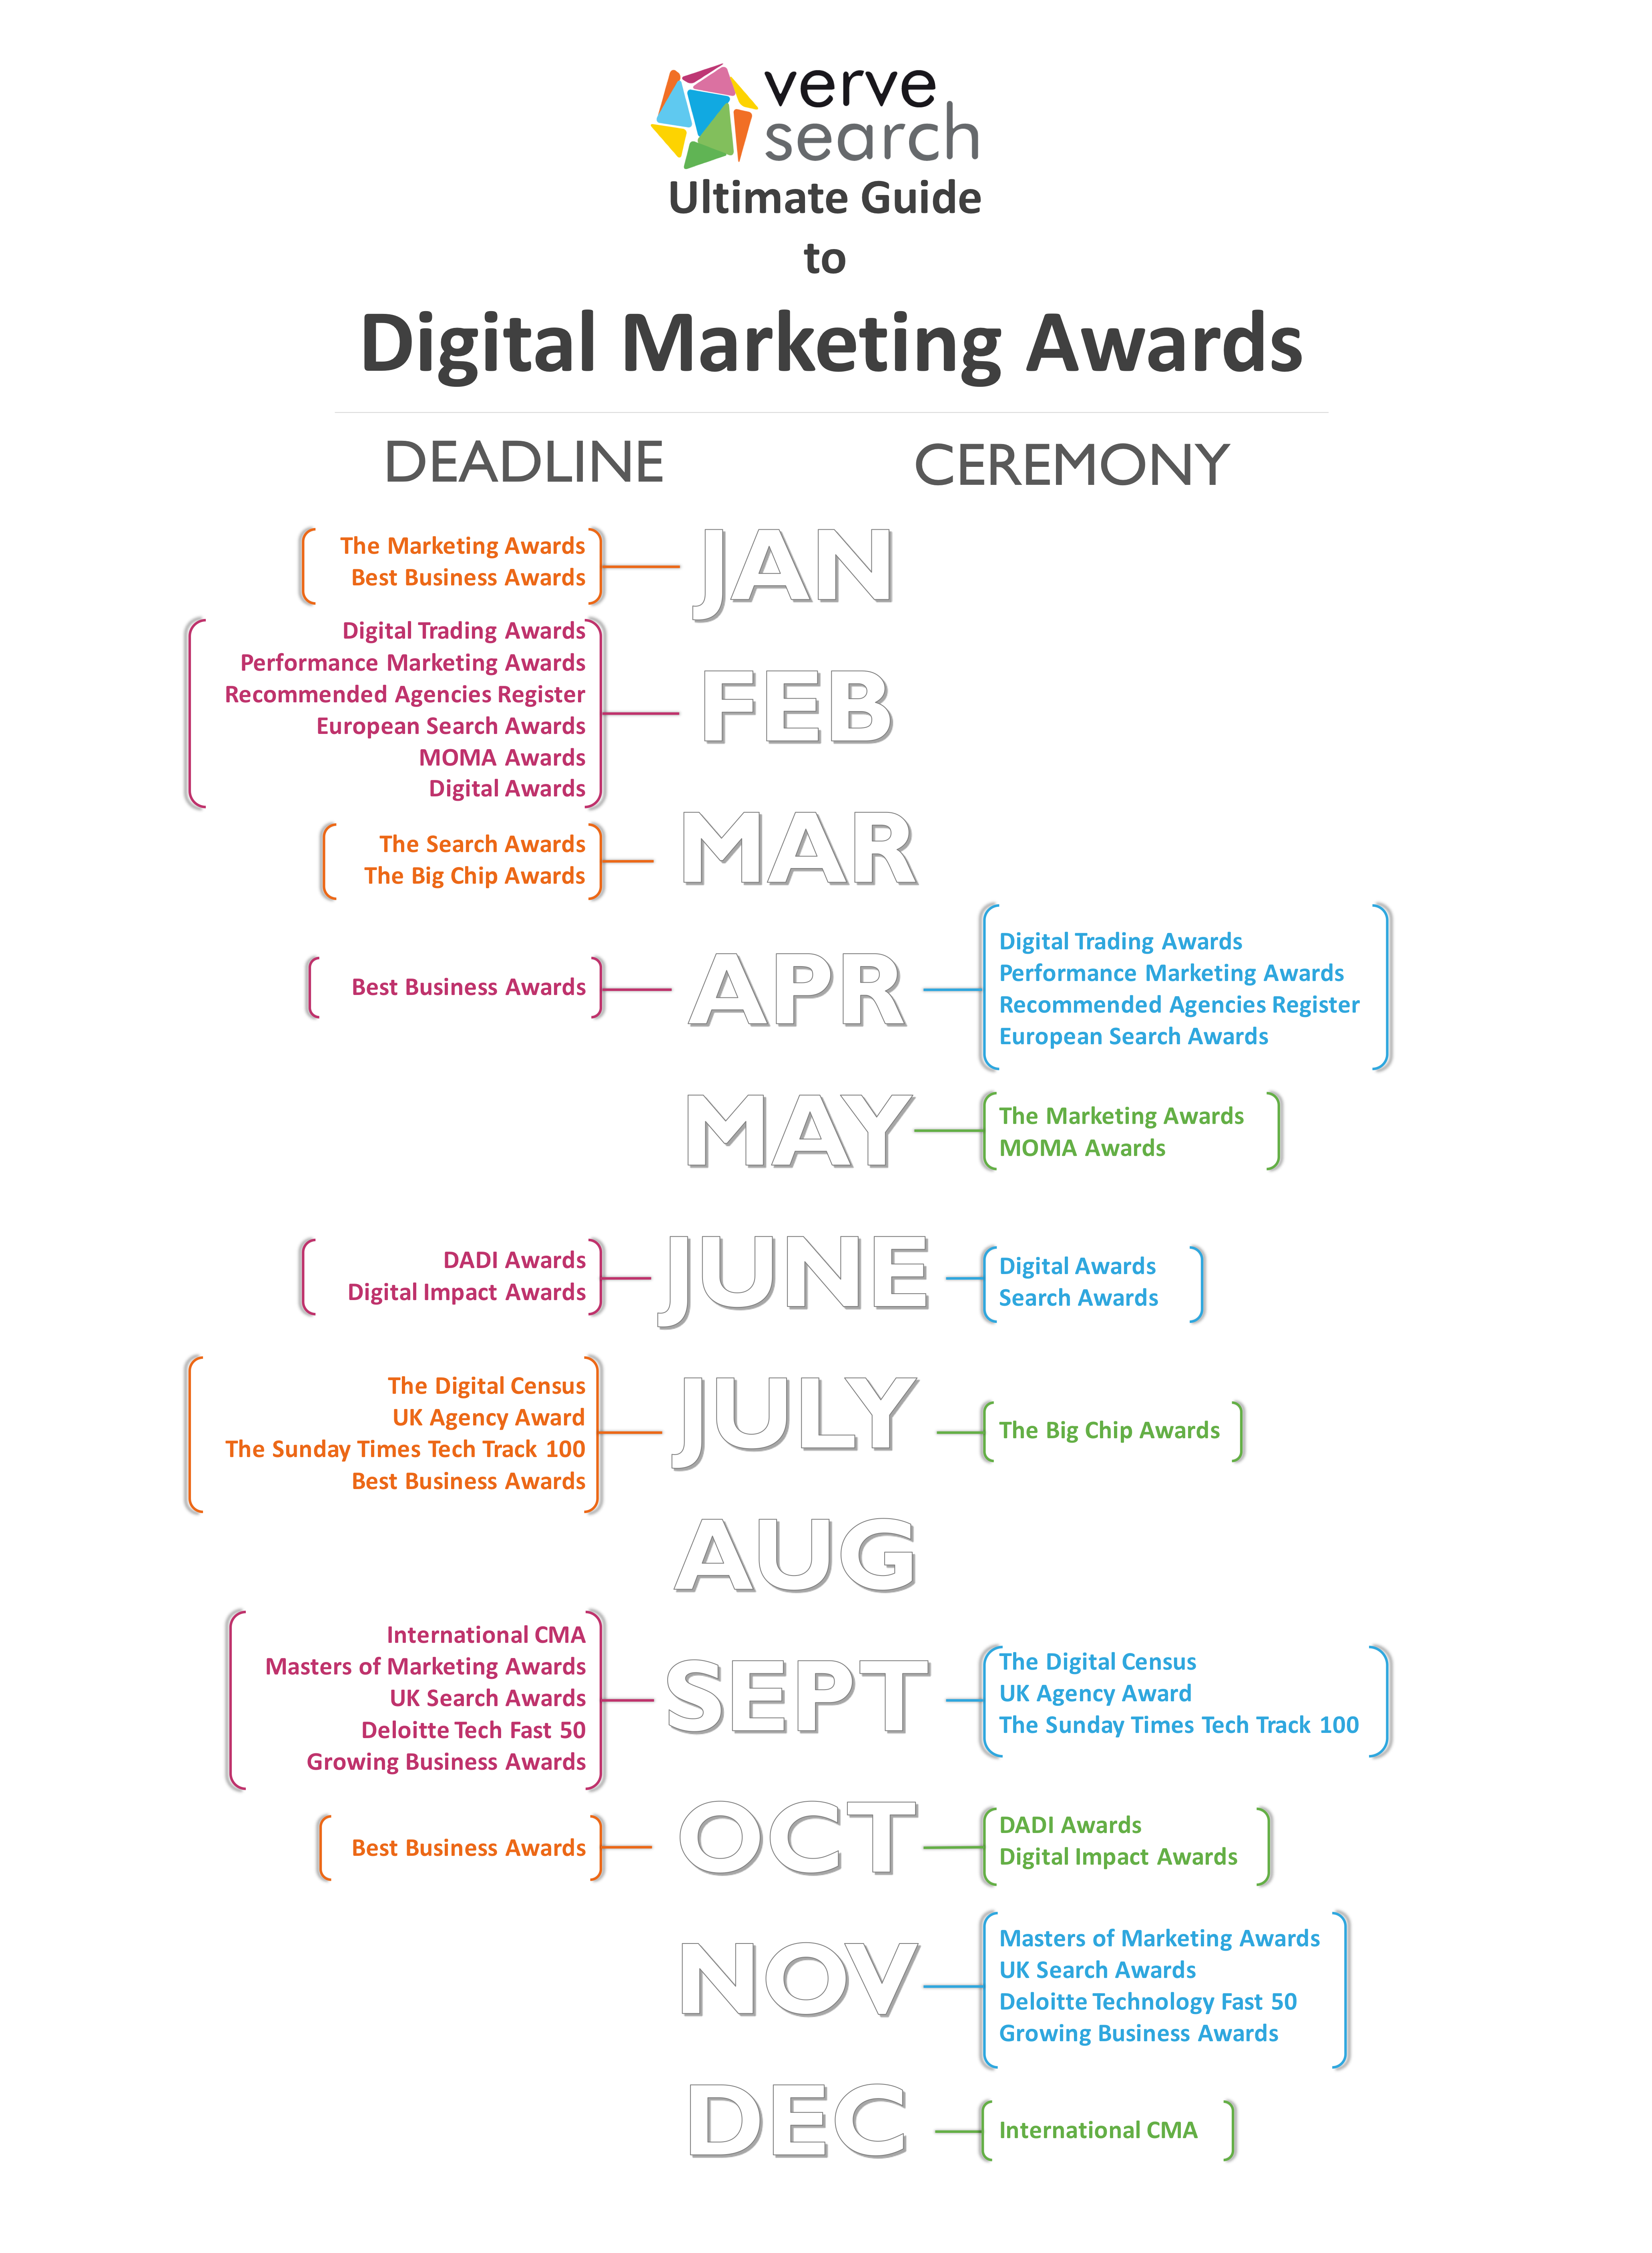 Ultimate Guide to Digital Marketing Awards